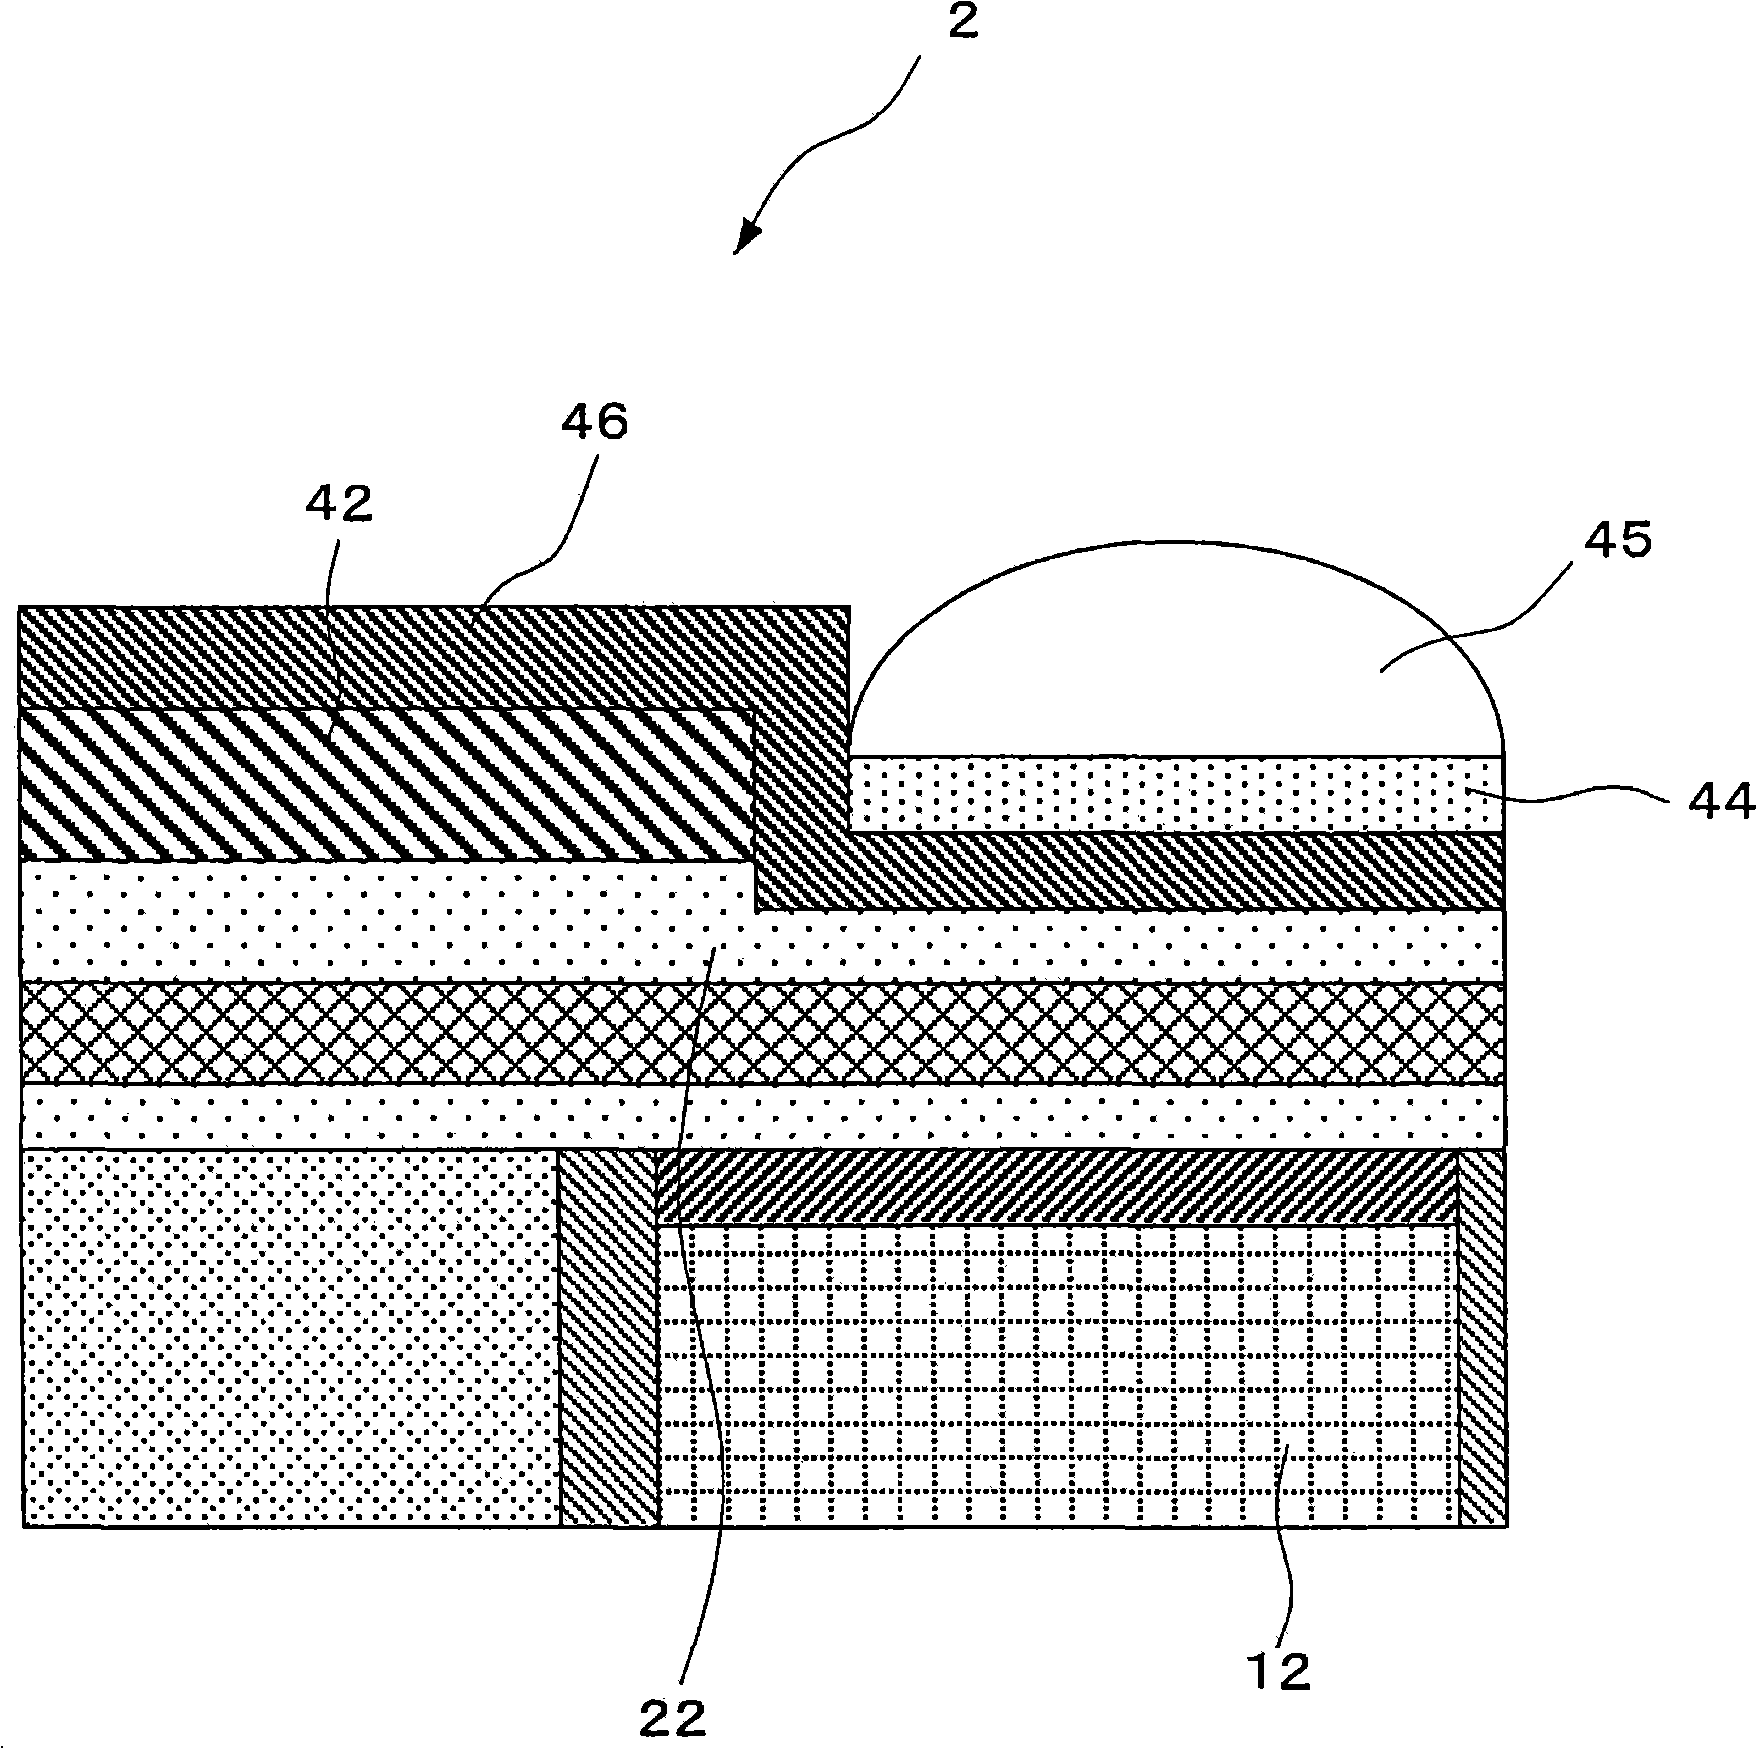 Solid state imaging device, its manufacturing method, and imaging device